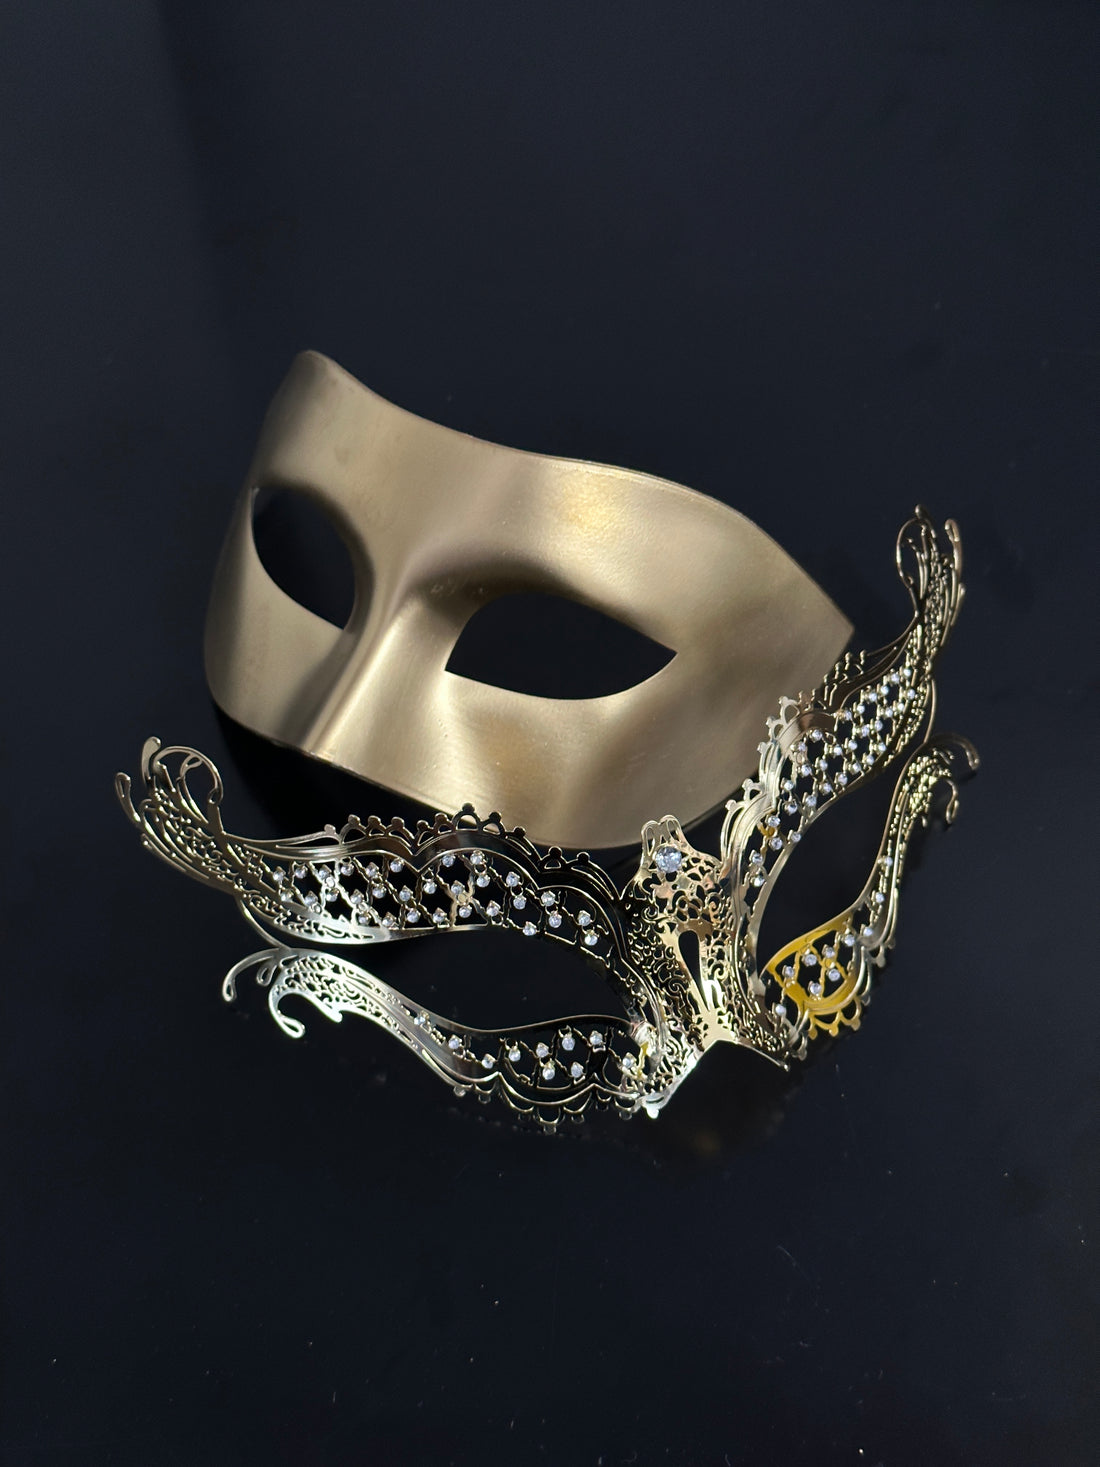 Couples masquerade mask set in gold for sale.